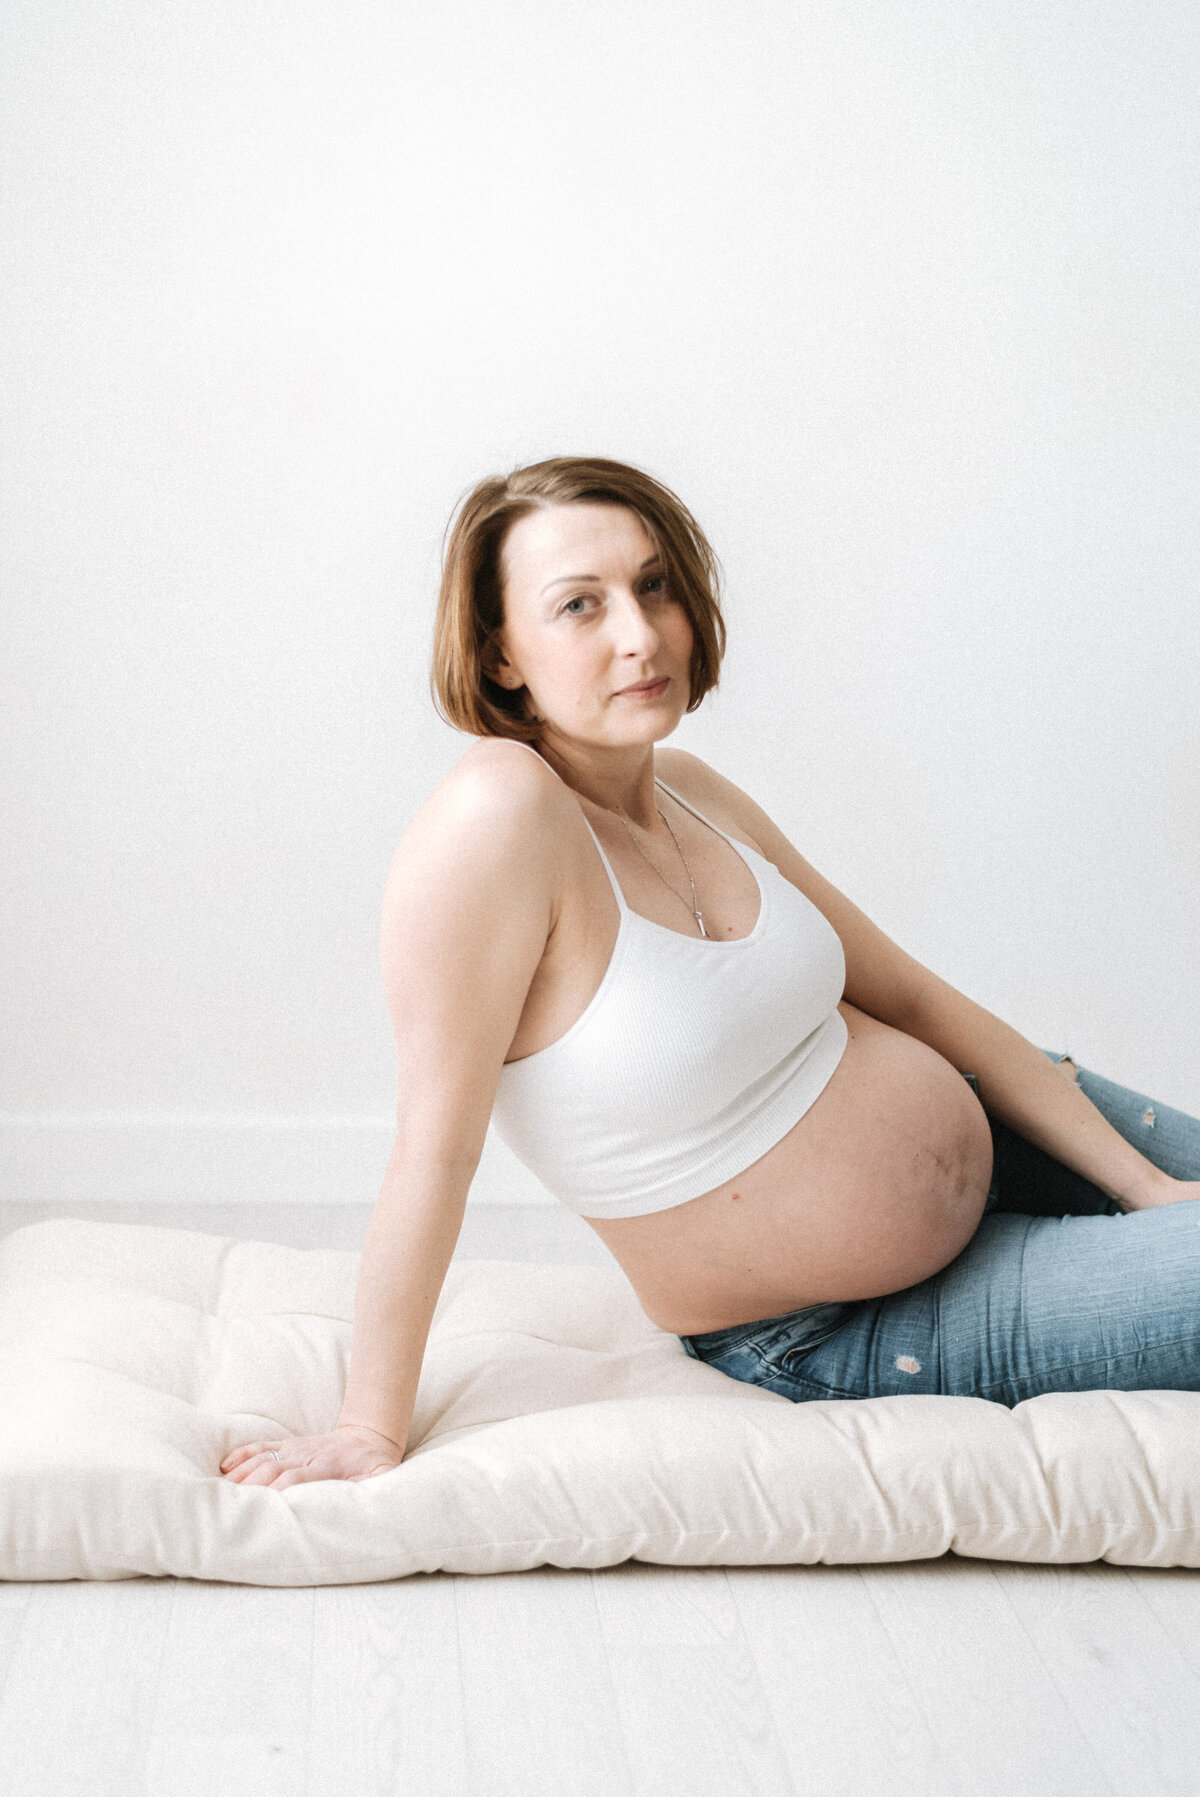 A pregnant women sitting on a cushion at maternity photoshoot in billingshurst